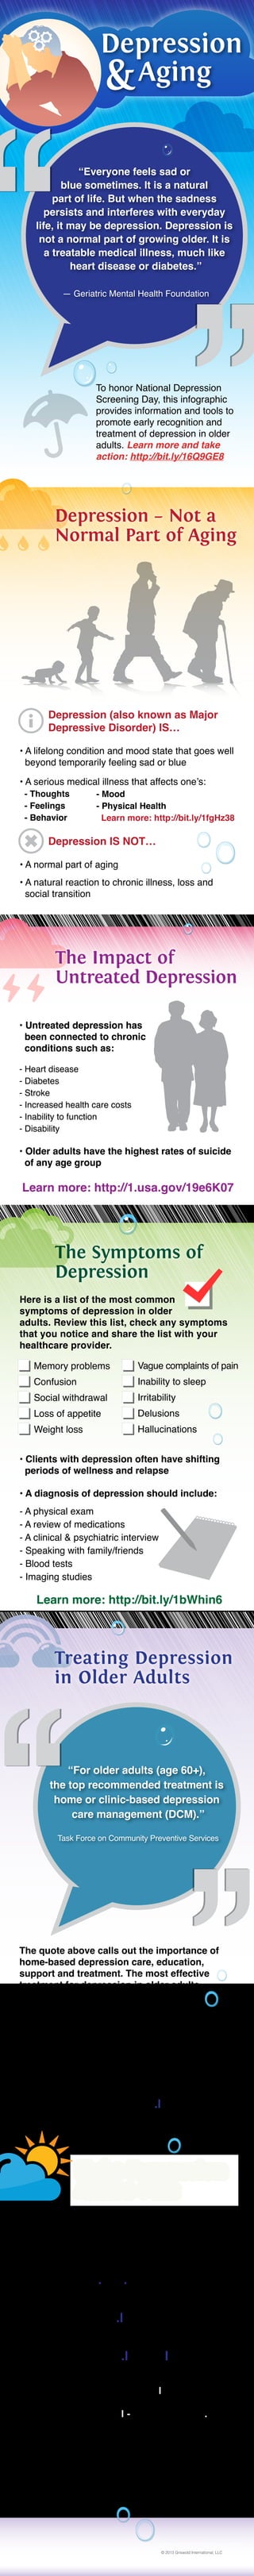 “Everyone feels sad or
blue sometimes. It is a natural
part of life. But when the sadness
persists and interferes with everyday
life, it may be depression. Depression is
not a normal part of growing older. It is
a treatable medical illness, much like
heart disease or diabetes.”
— Geriatric Mental Health Foundation

To honor National Depression
Screening Day, this infographic
provides information and tools to
promote early recognition and
treatment of depression in older
adults. Learn more and take
action: http://bit.ly/16Q9GE8

Depression – Not a
Normal Part of Aging

Depression (also known as Major
Depressive Disorder) IS…
• A lifelong condition and mood state that goes well
beyond temporarily feeling sad or blue
• A serious medical illness that affects one’s:
- Thoughts
- Feelings
- Behavior

- Mood
- Physical Health
Learn more: http://bit.ly/1fgHz38

Depression IS NOT…
• A normal part of aging
• A natural reaction to chronic illness, loss and
social transition

The Impact of
Untreated Depression
• Untreated depression has
been connected to chronic
conditions such as:
- Heart disease
- Diabetes
- Stroke
- Increased health care costs
- Inability to function
- Disability

• Older adults have the highest rates of suicide
of any age group

Learn more: http://1.usa.gov/19e6K07

The Symptoms of
Depression
Here is a list of the most common
symptoms of depression in older
adults. Review this list, check any symptoms
that you notice and share the list with your
healthcare provider.
Memory problems

Vague complaints of pain

Confusion

Inability to sleep

Social withdrawal

Irritability

Loss of appetite

Delusions

Weight loss

Hallucinations

• Clients with depression often have shifting
periods of wellness and relapse
• A diagnosis of depression should include:
- A physical exam
- A review of medications
- A clinical & psychiatric interview
- Speaking with family/friends
- Blood tests
- Imaging studies

Learn more: http://bit.ly/1bWhin6

Treating Depression
in Older Adults

“For older adults (age 60+),
the top recommended treatment is
home or clinic-based depression
care management (DCM).”
Task Force on Community Preventive Services

The quote above calls out the importance of
home-based depression care, education,
support and treatment. The most effective
treatment for depression in older adults
combines medicine with:
- Cognitive behavioral therapy (CBT)
- Client and family education
- Support groups
- Wellness

- Home care coordination

Learn more: http://bit.ly/1fgHz38

Fight Depression
Action Plan
If you think that you or someone you care about
may be living with depression, the following
resources can help.
Learn more about Depression in Older Adults:

http://1.usa.gov/GFAHxt

Learn more about National Depression Screening Day:

http://bit.ly/16Q9GE8
Join a Support Group:

http://bit.ly/GFAIBu
Get emergency help, if you or
someone you care about are at
risk for self-injury or suicide.
- Don't leave the person alone

- Call 911 or a local emergency number right away
- Or, if you think you can do so safely, take the person
to the nearest hospital emergency room yourself

brought to you by:

GriswoldHomeCare.com
© 2013 Griswold International, LLC

 